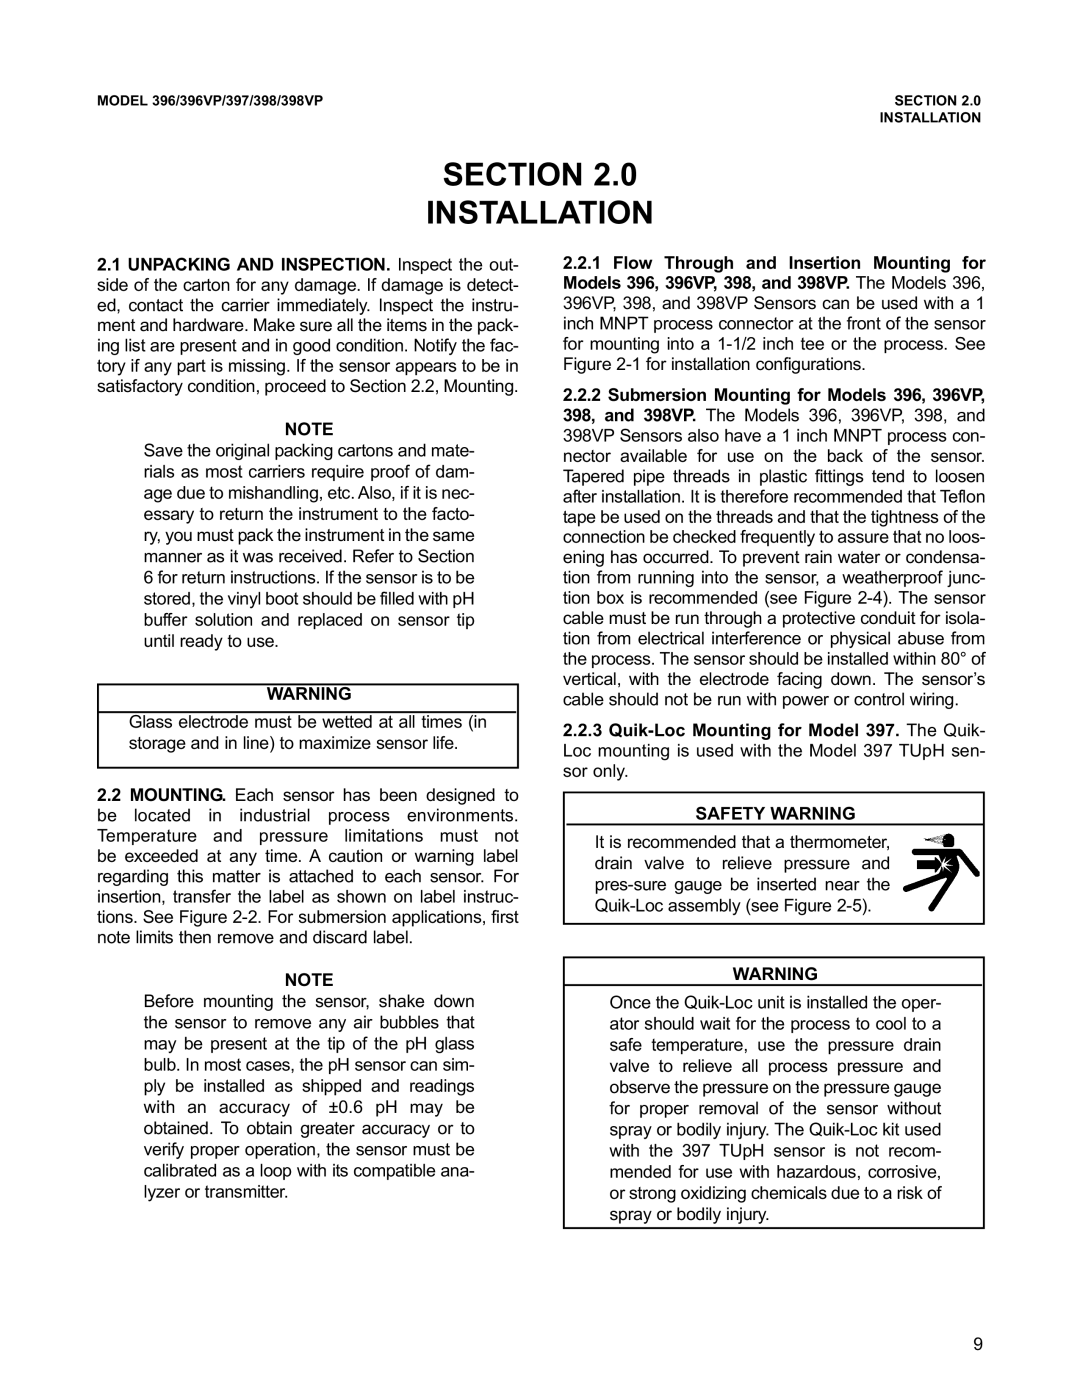 Emerson 398VP, 396VP, 397 instruction manual Section Installation, Safety Warning 